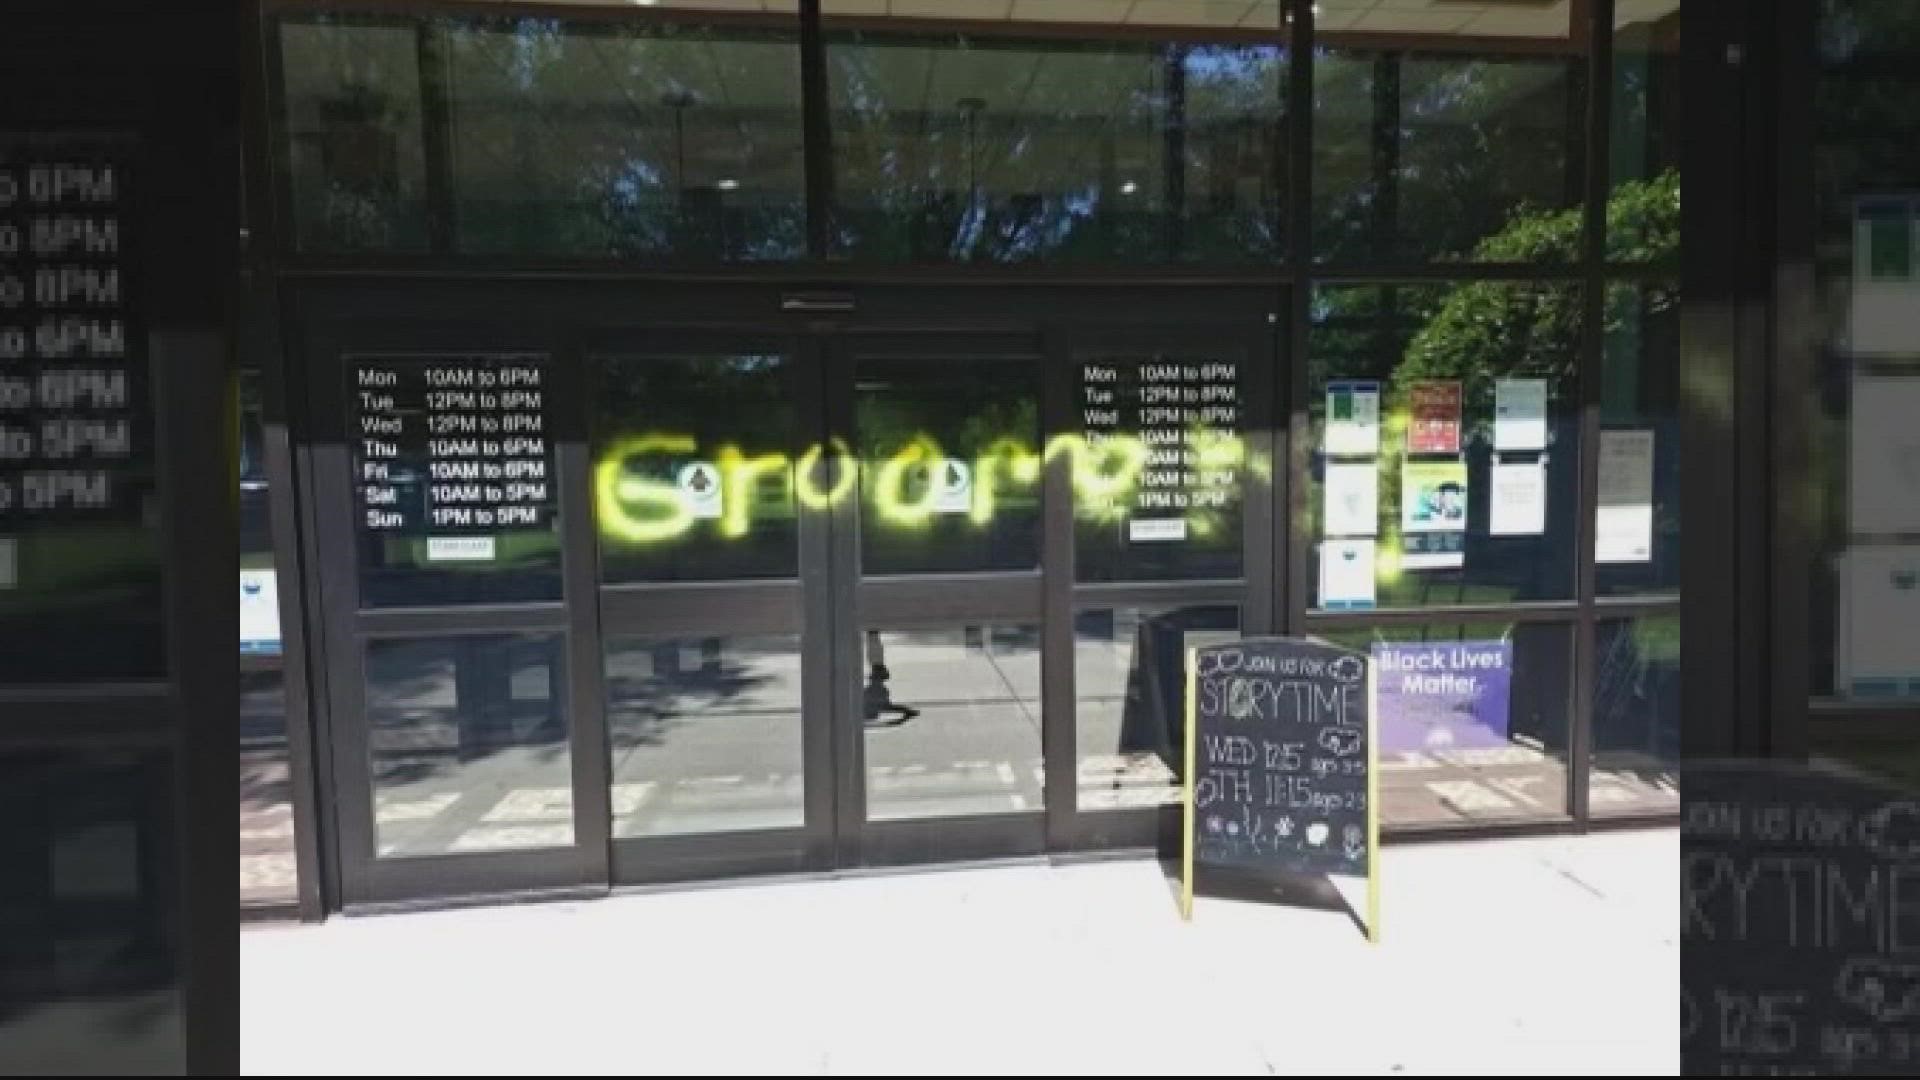 Charles Sutherland of Takoma Park confessed to being the person that spray painted "Groomer" on two public libraries during Capital Pride week.